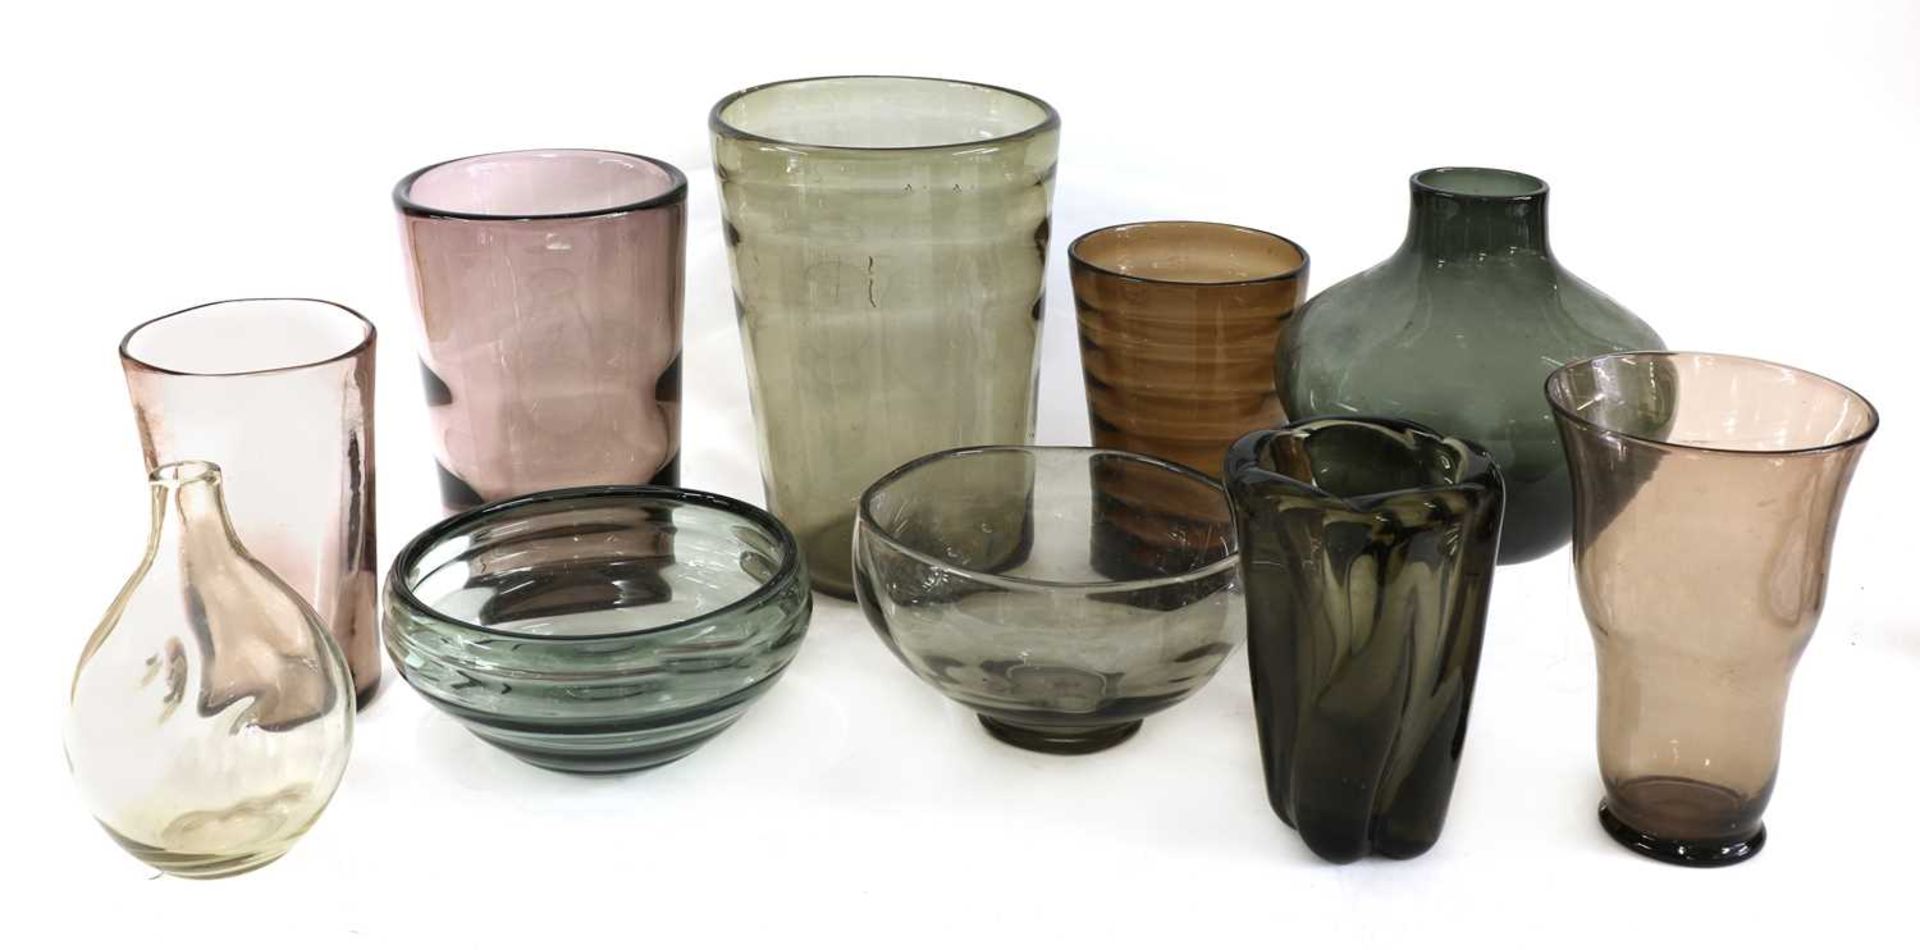 'Twilight' and 'Shadow Green' - a selection of Whitefriars and other glass,